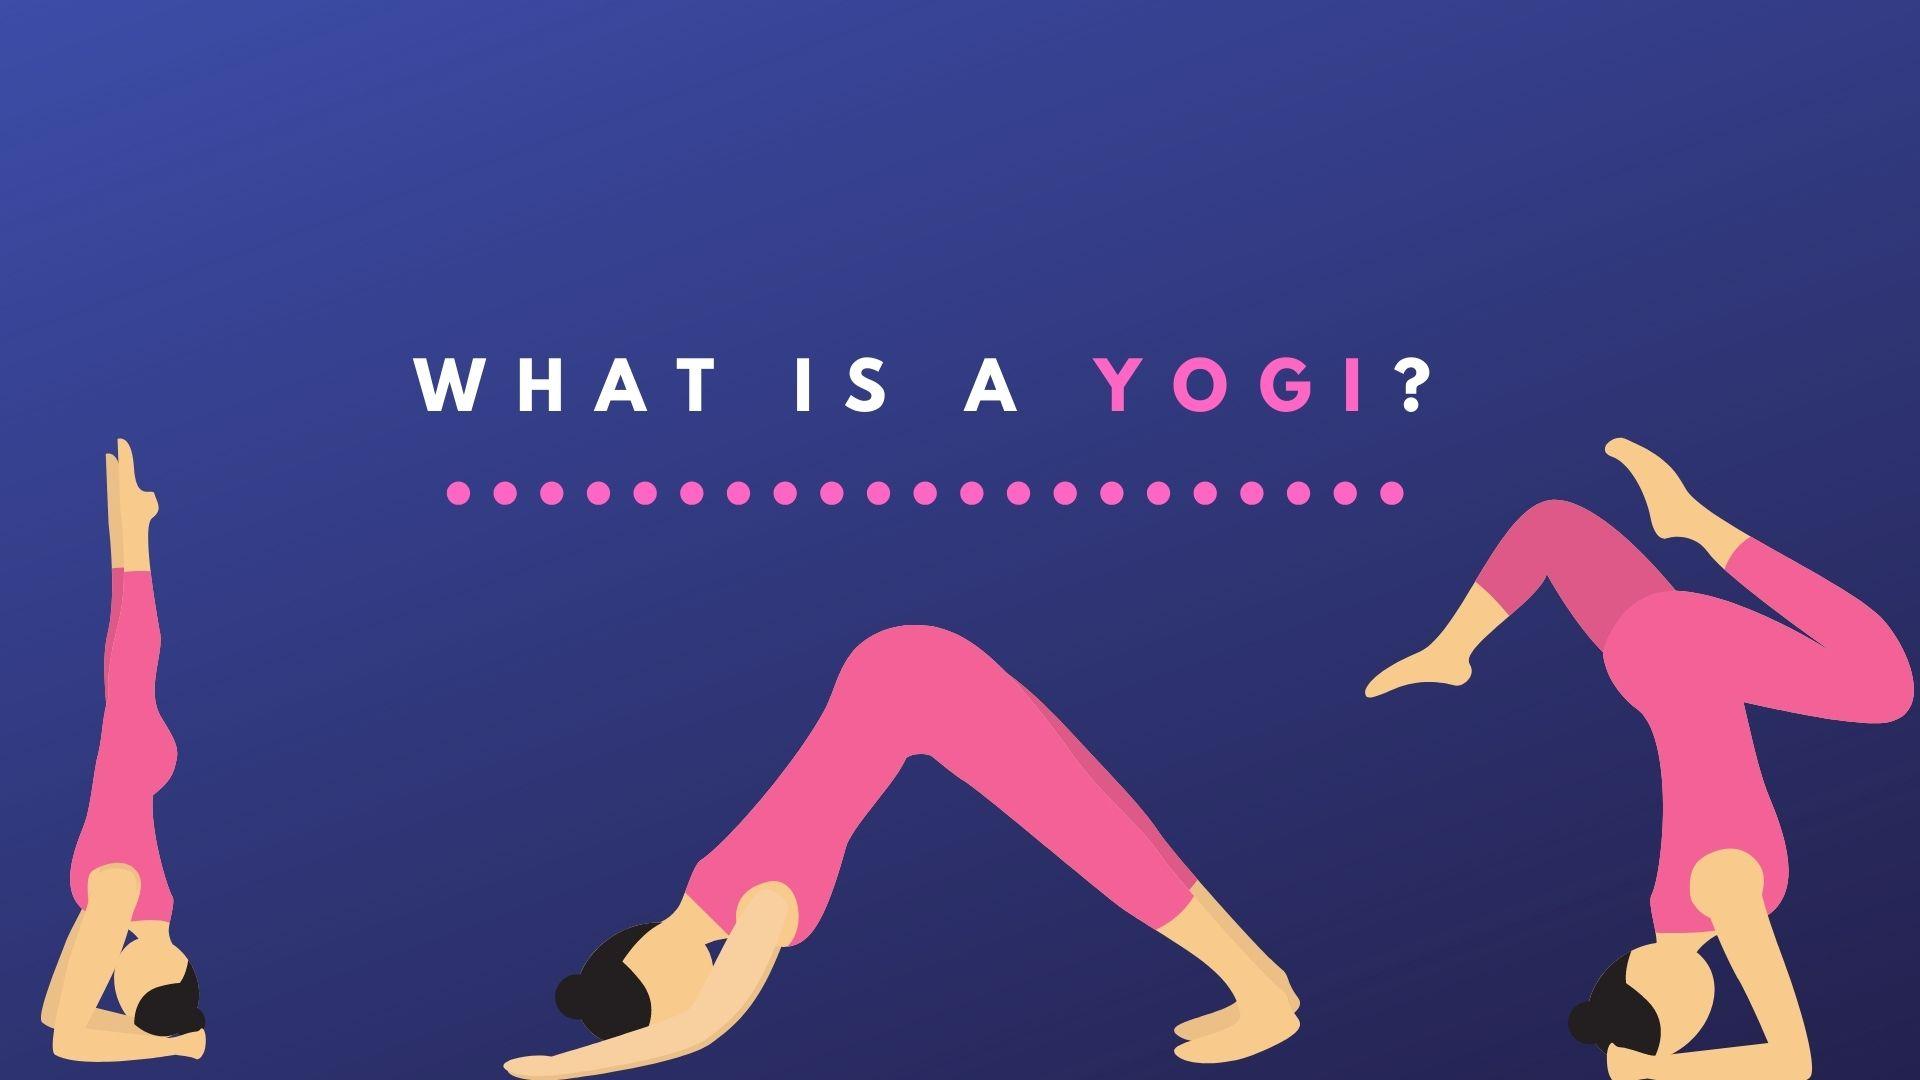 What is a complementary pose in yoga? - Quora